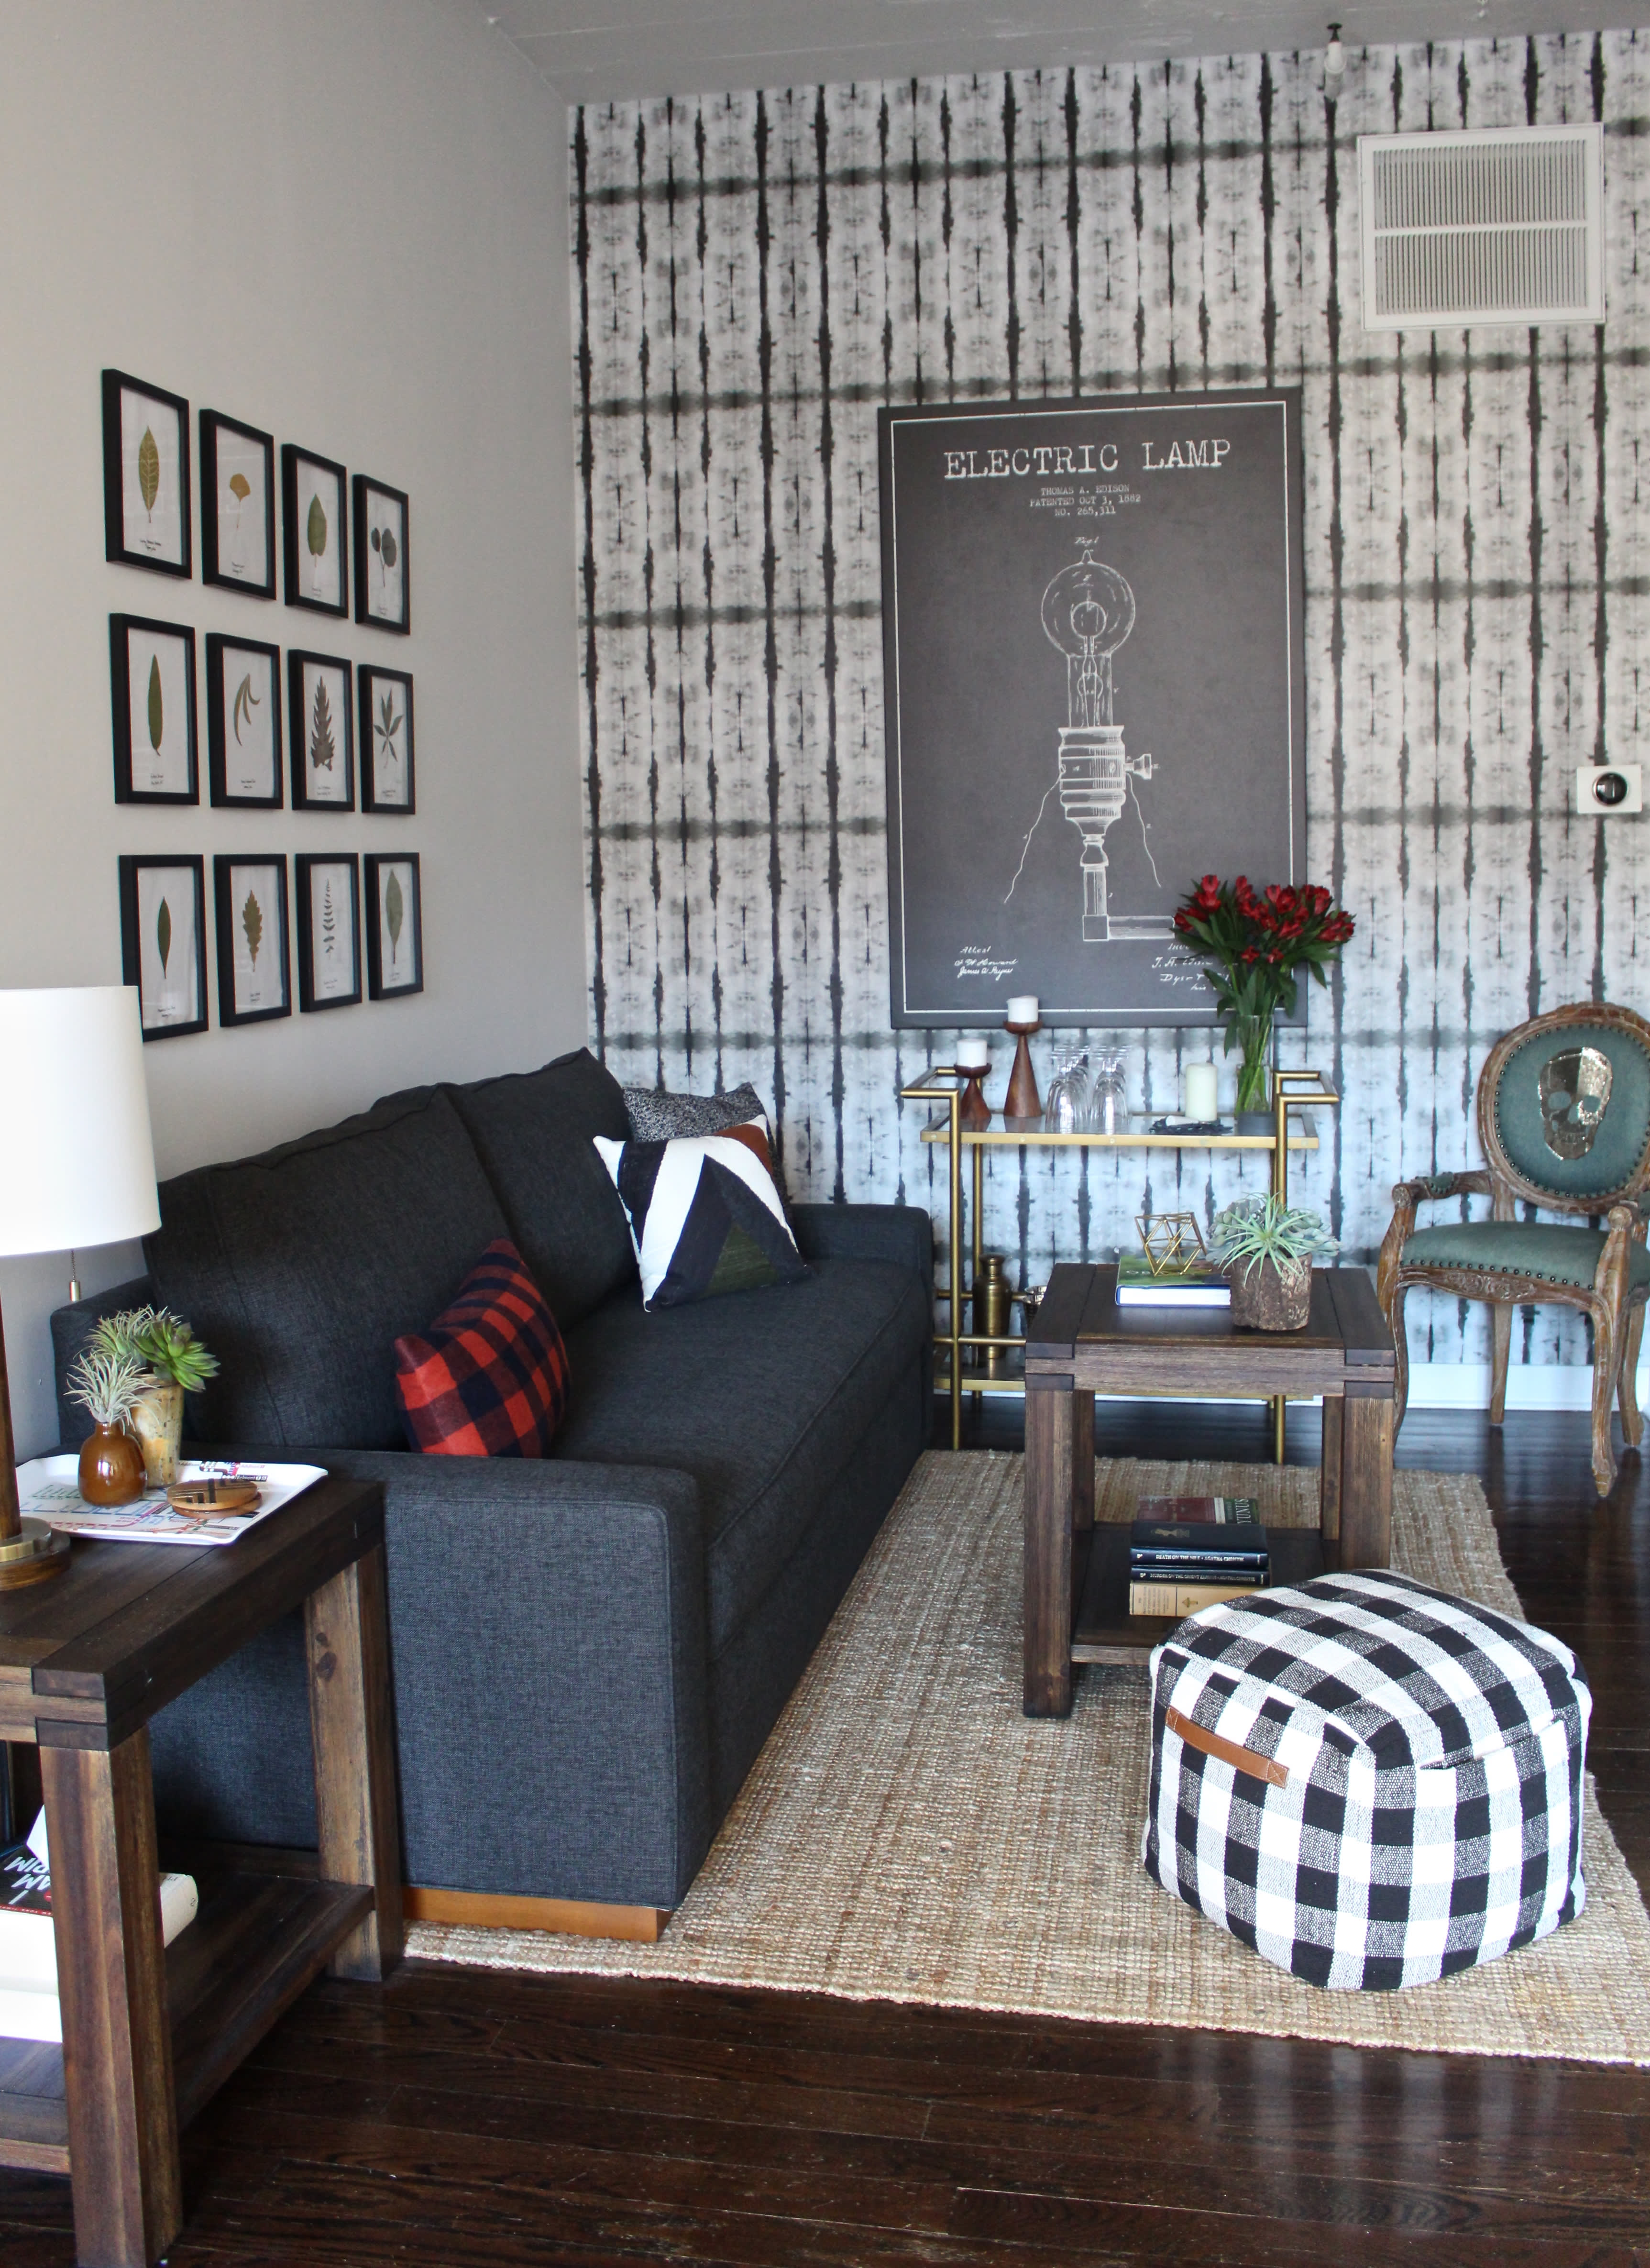 Decorating With Plaid Plaid Design Ideas Apartment Therapy Bringing plaid into bedroom